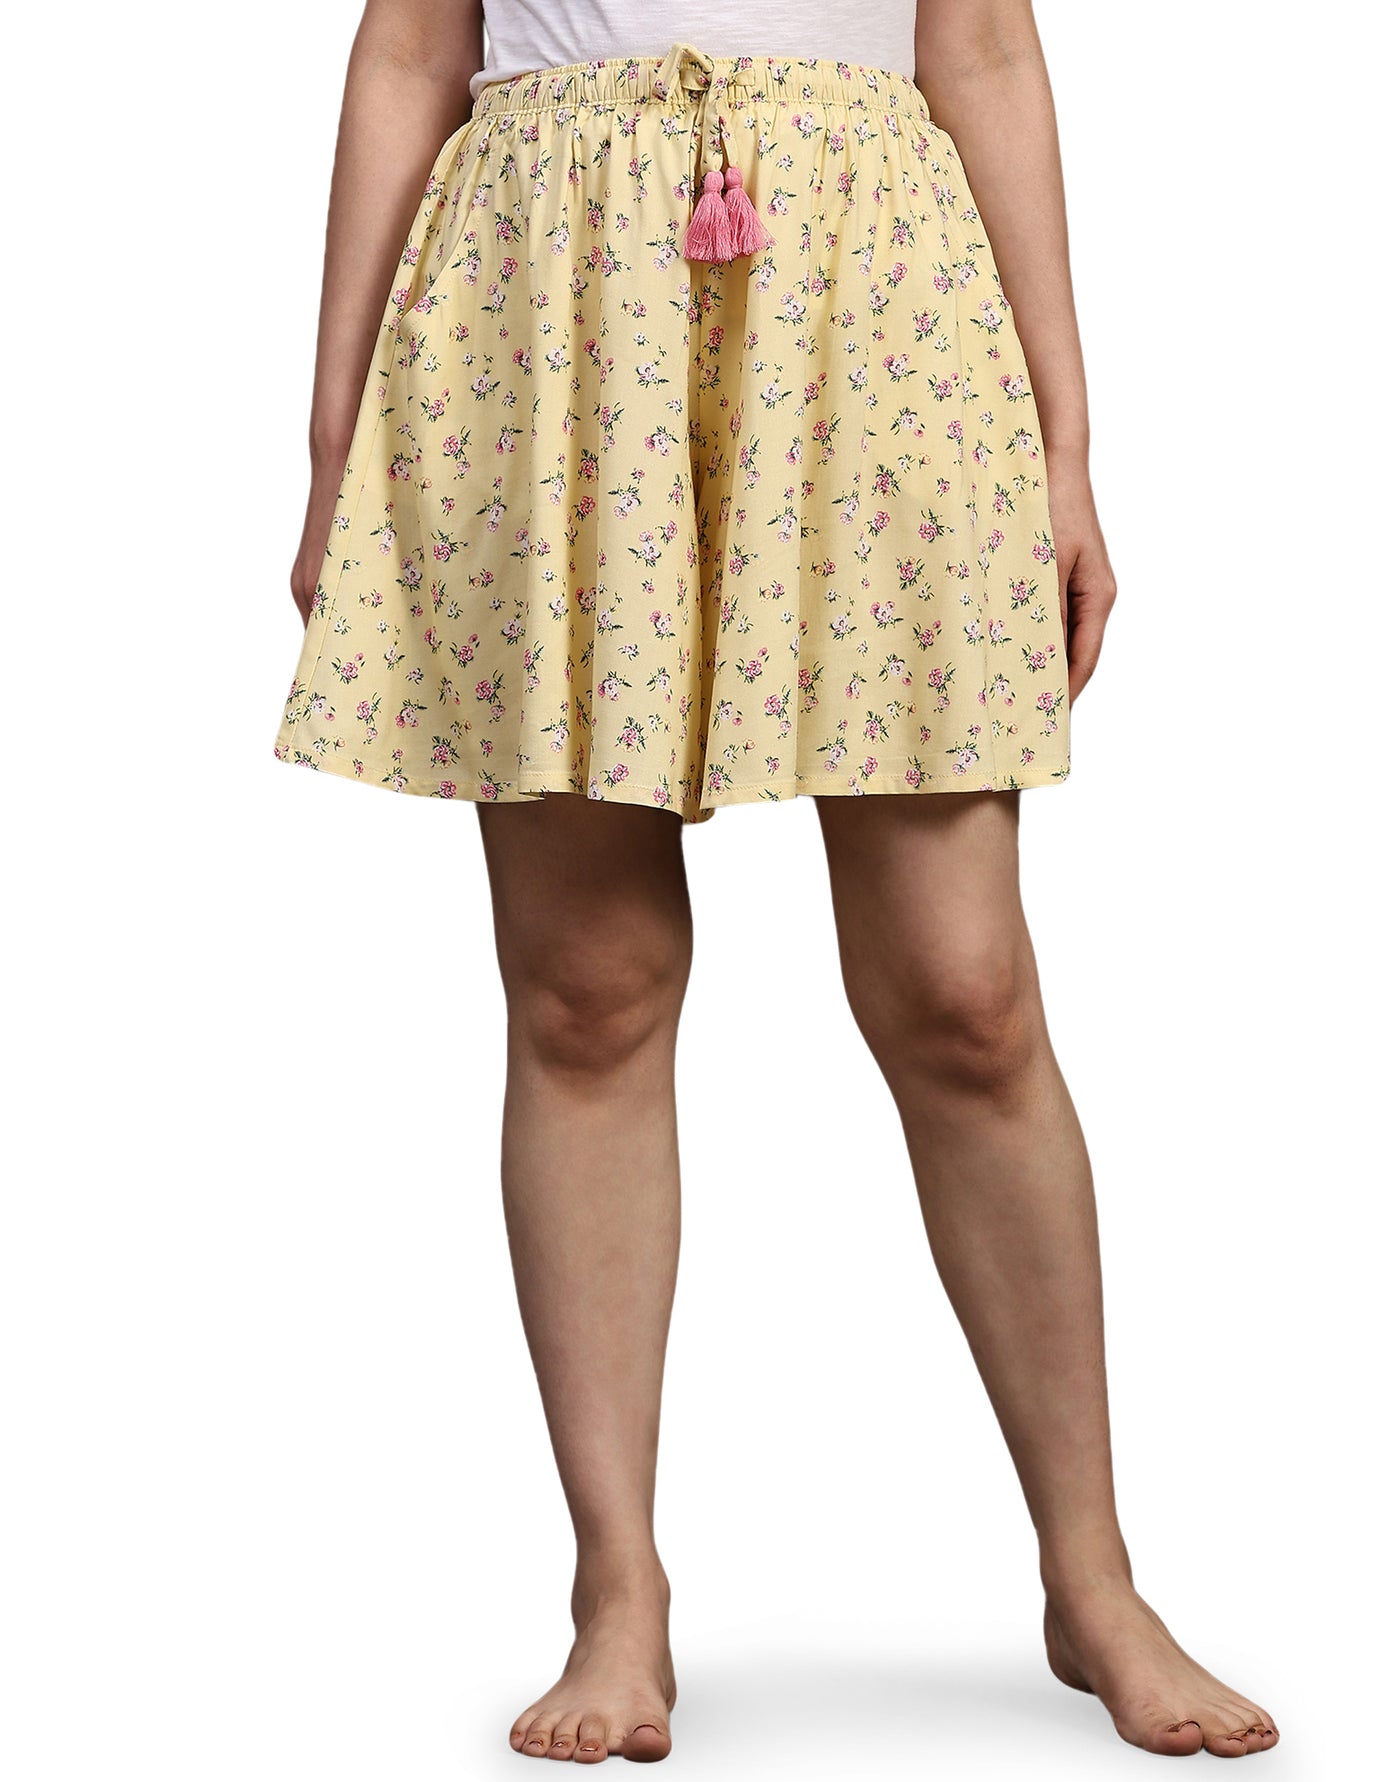 Culotte Shorts for Women-Yellow Floral